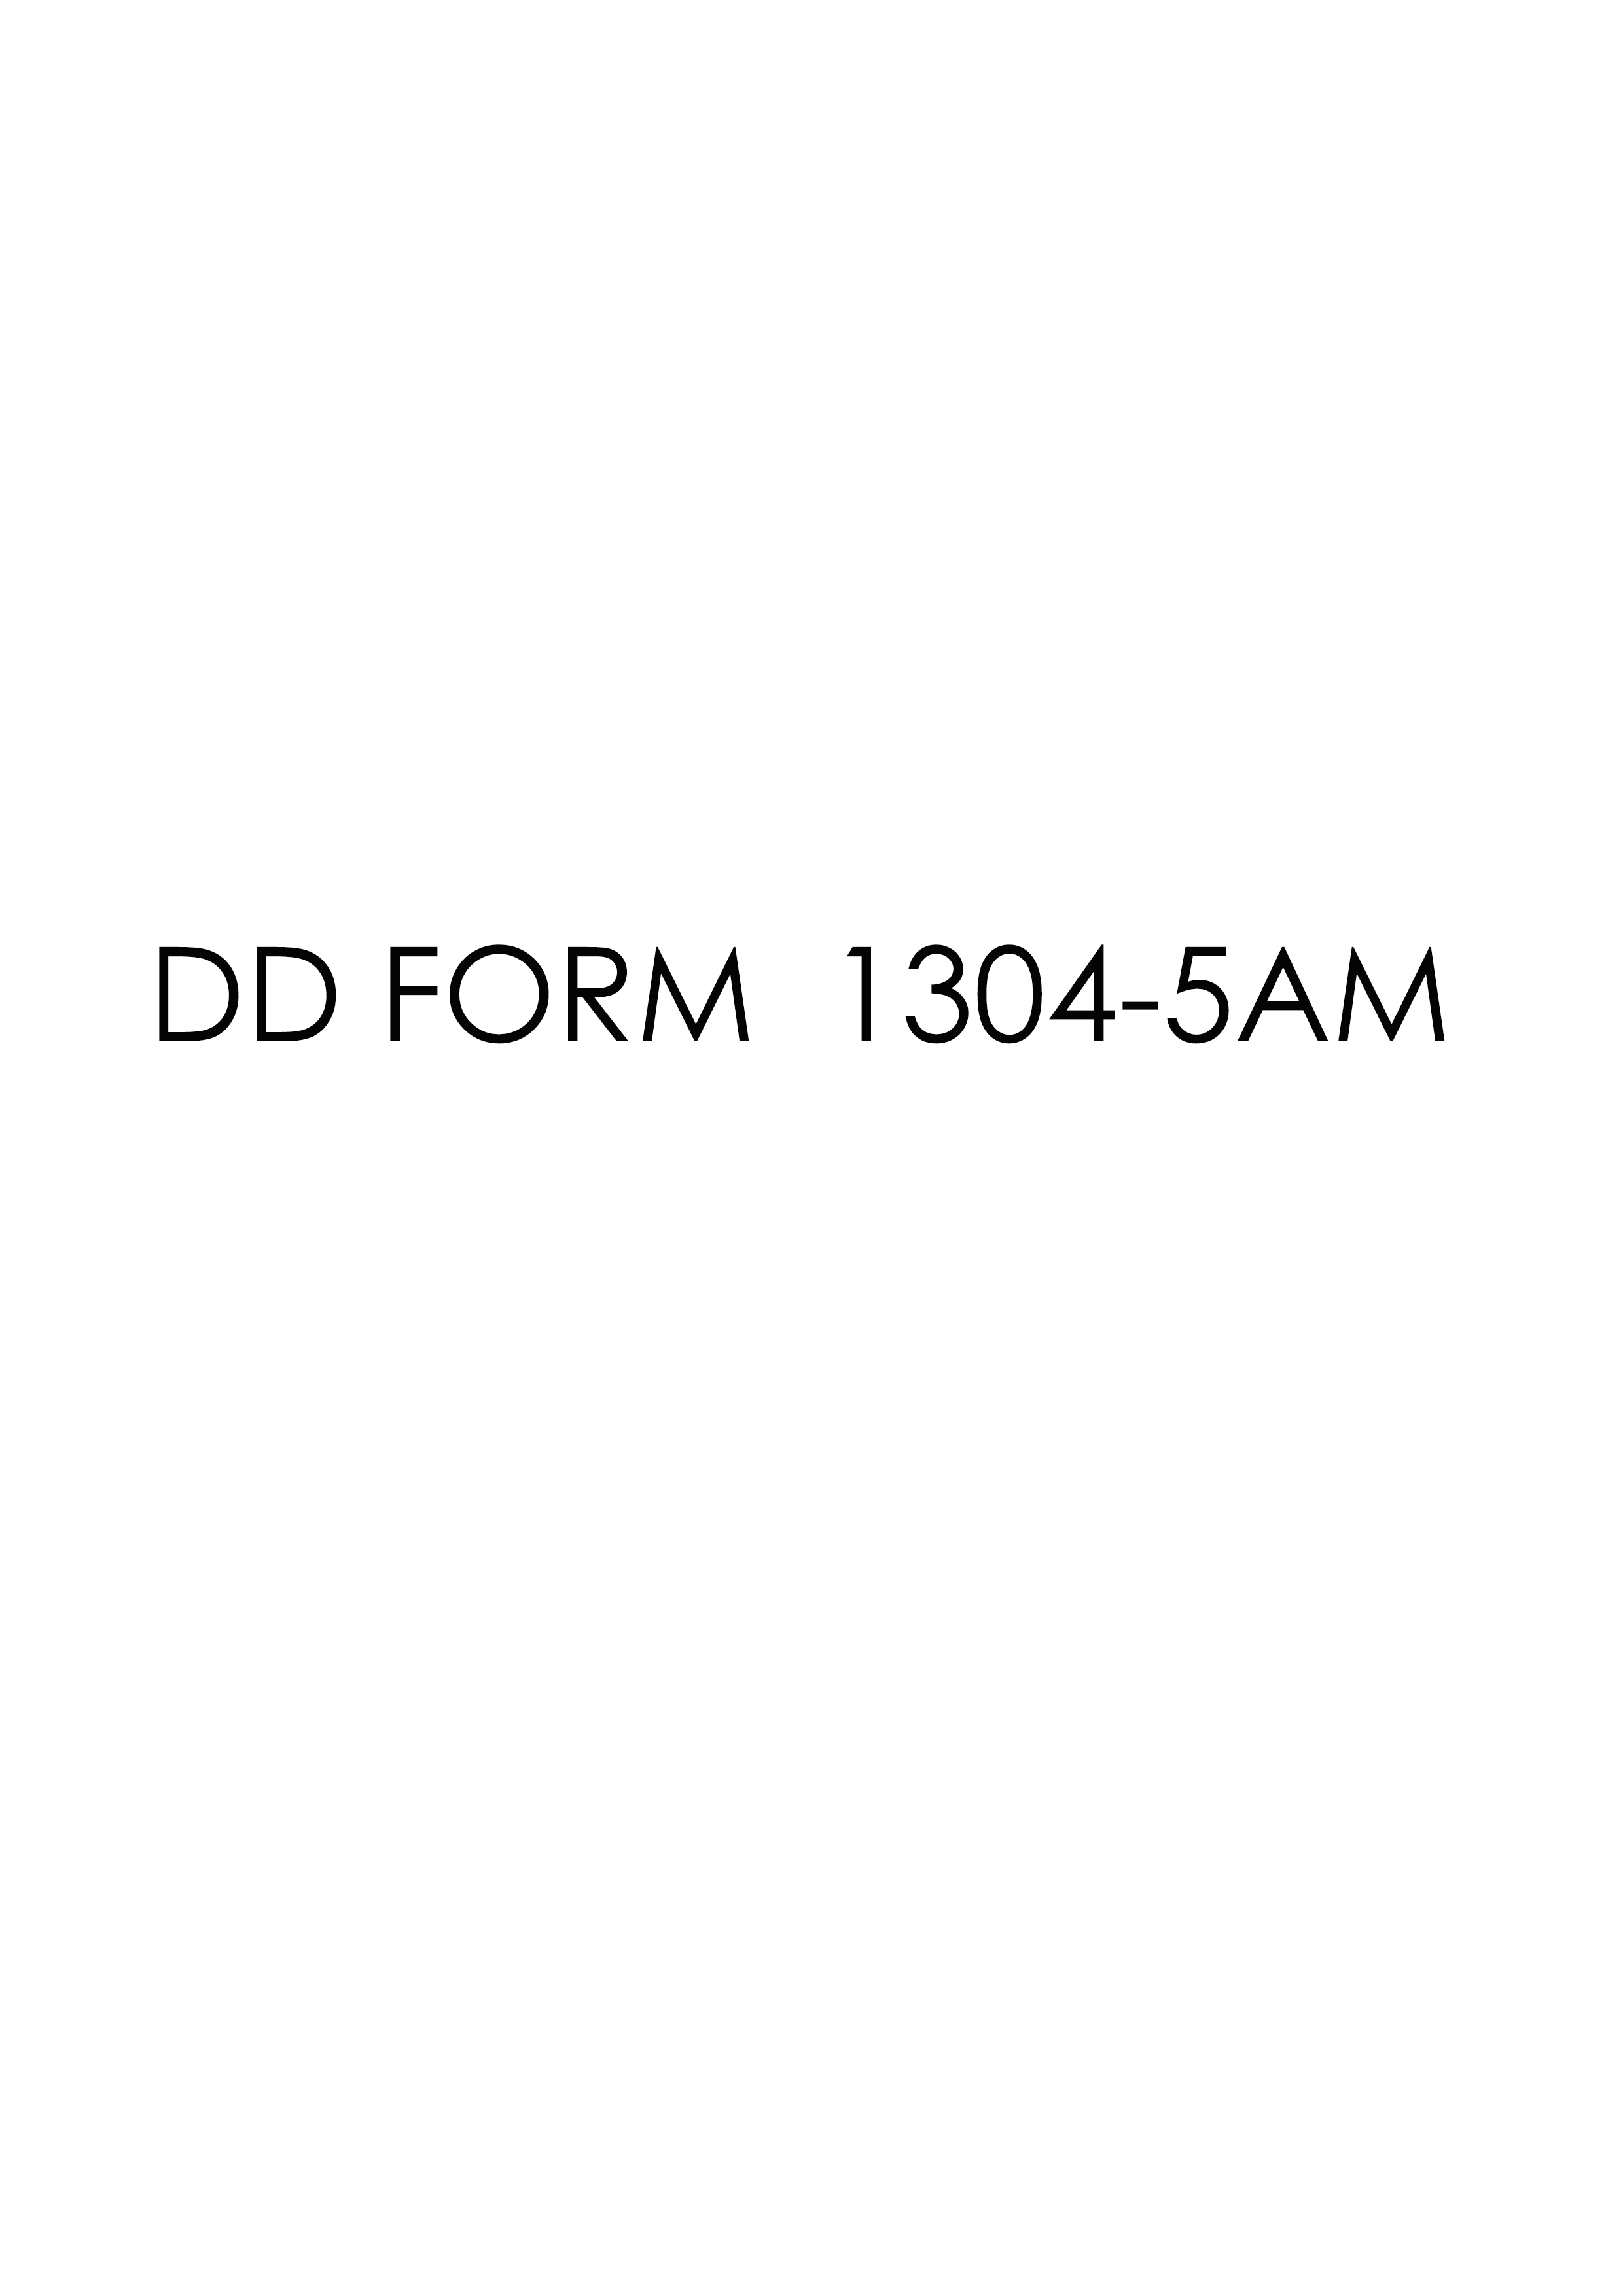 Download Fillable dd Form 1304-5AM